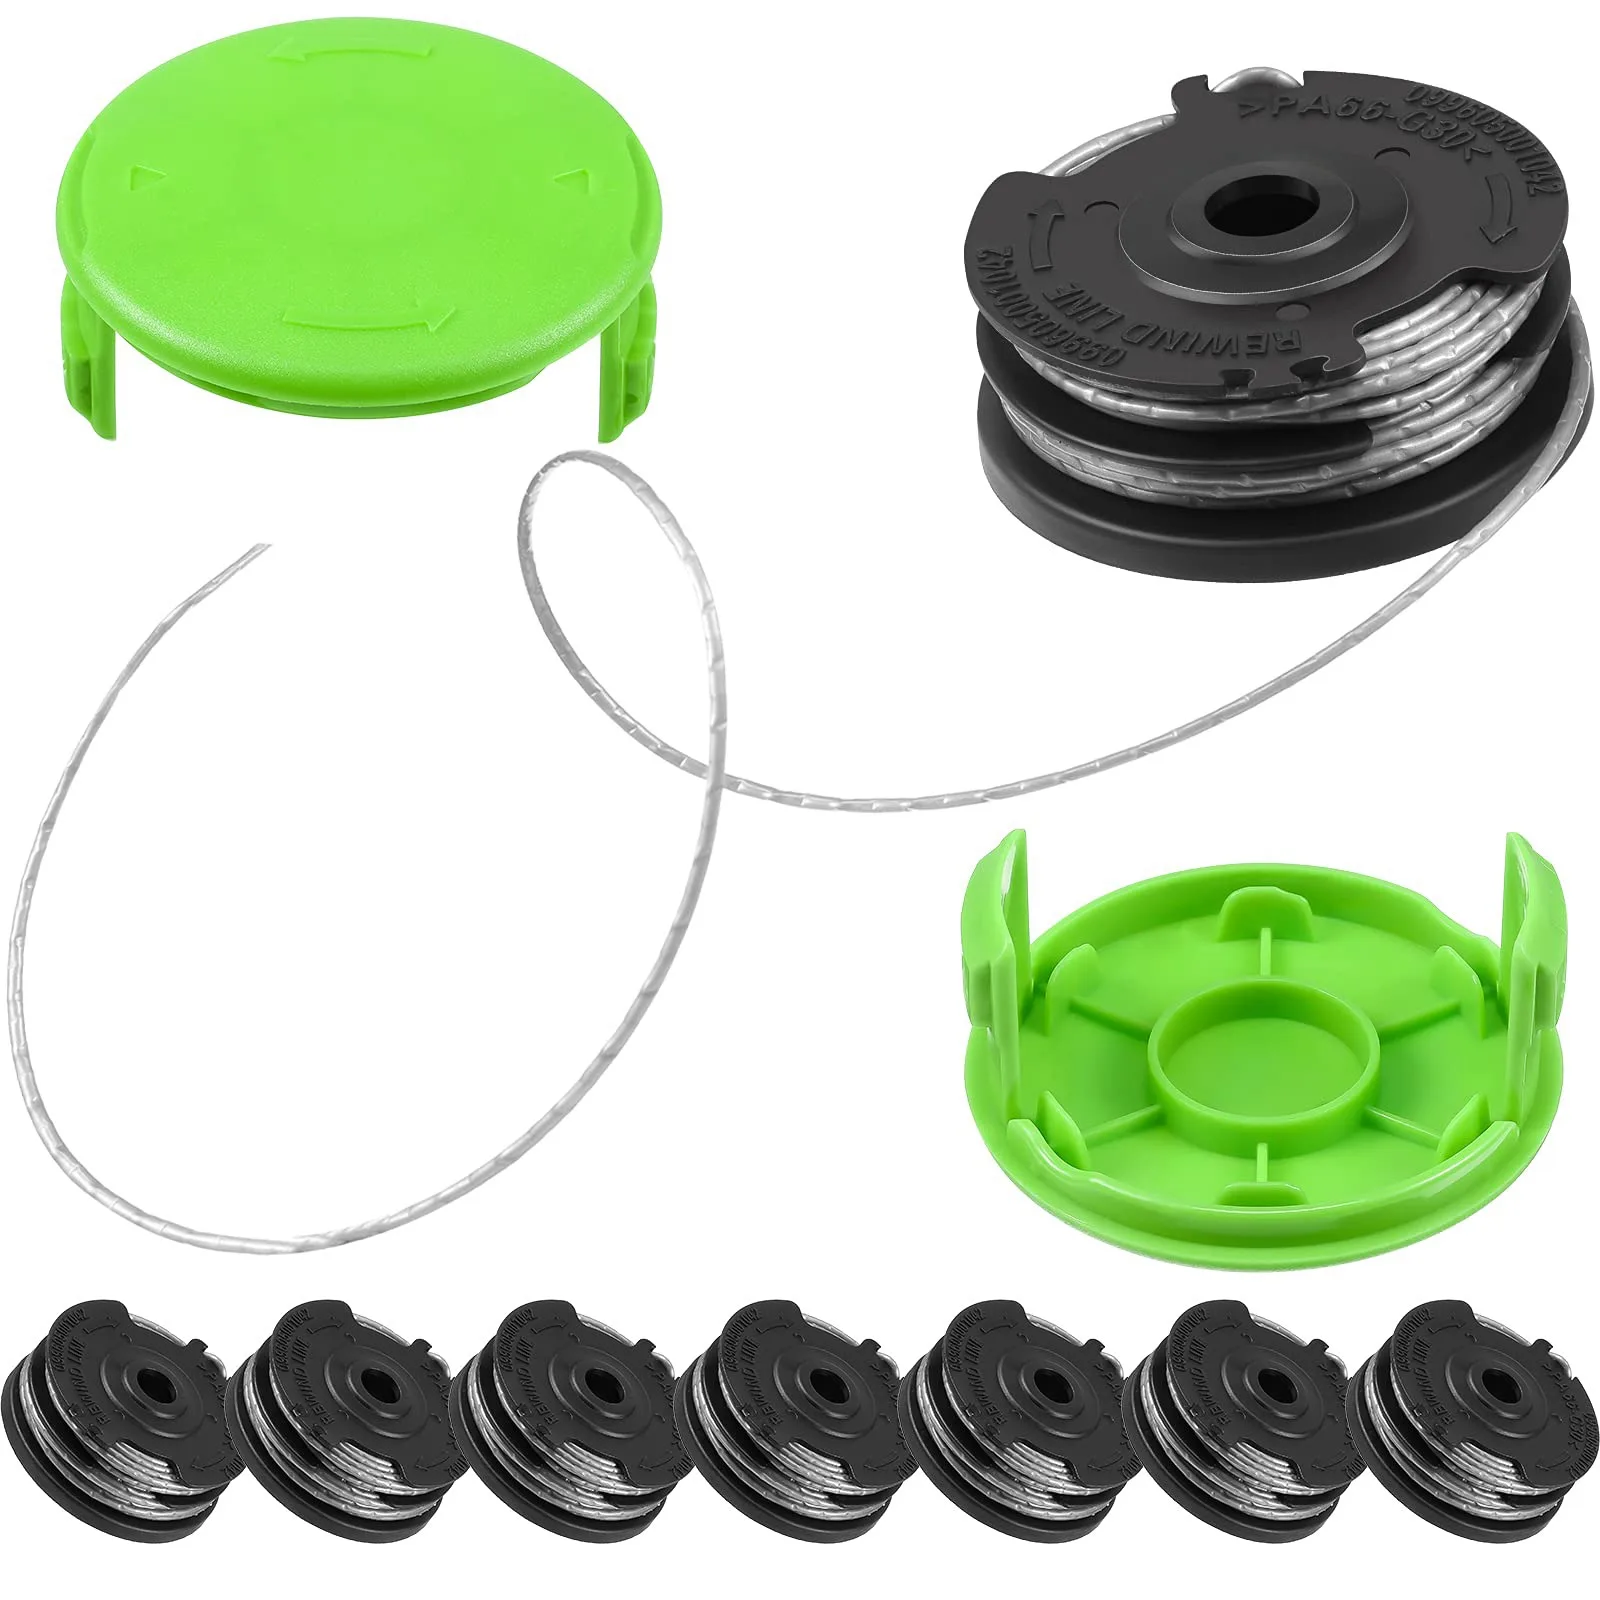 

20Ft 0.065inch Weed Eater Dual Line String Trimmer Replacement Spool 2900719 for Greenworks Models 2101602 and 2101602A